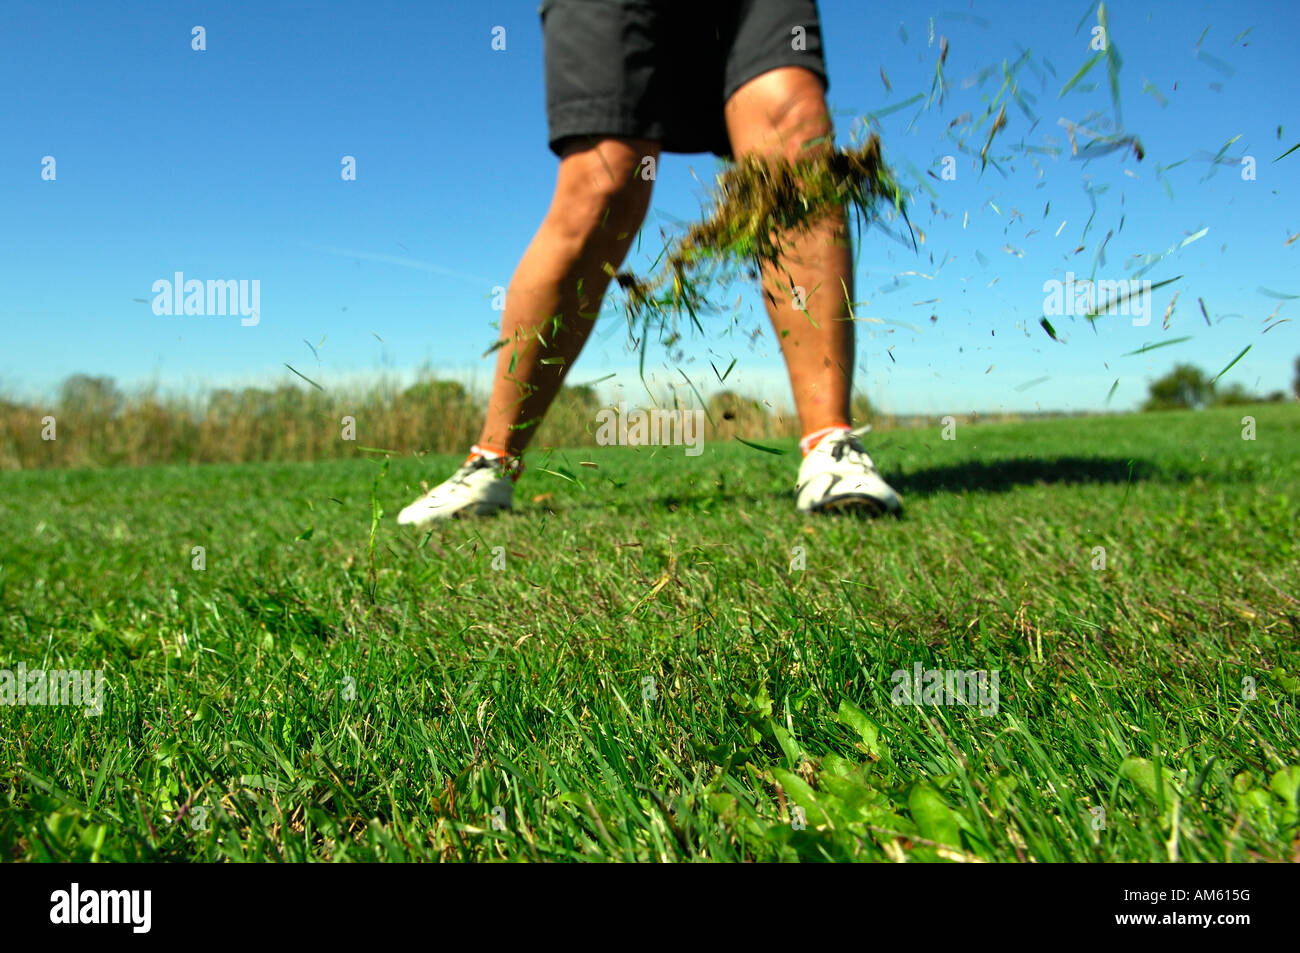 Golfer after a hit, Golf course, Caorle, Veneto, Italy Stock Photo